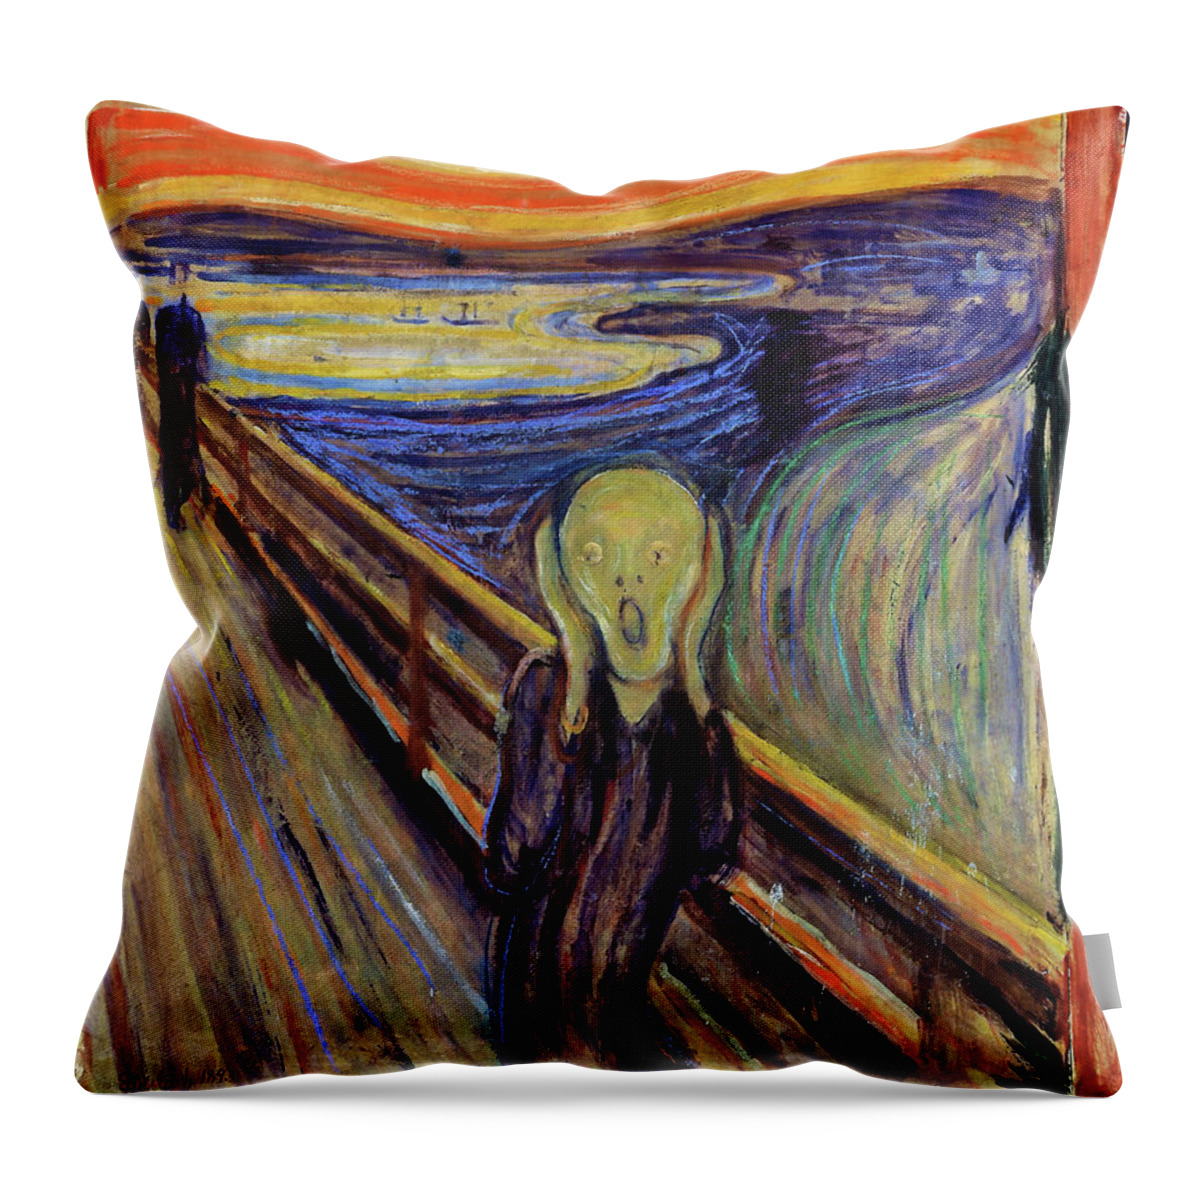 Edvard Munch Throw Pillow featuring the painting The Scream 1893 - Digital Remastered Edition2 by Edvard Munch